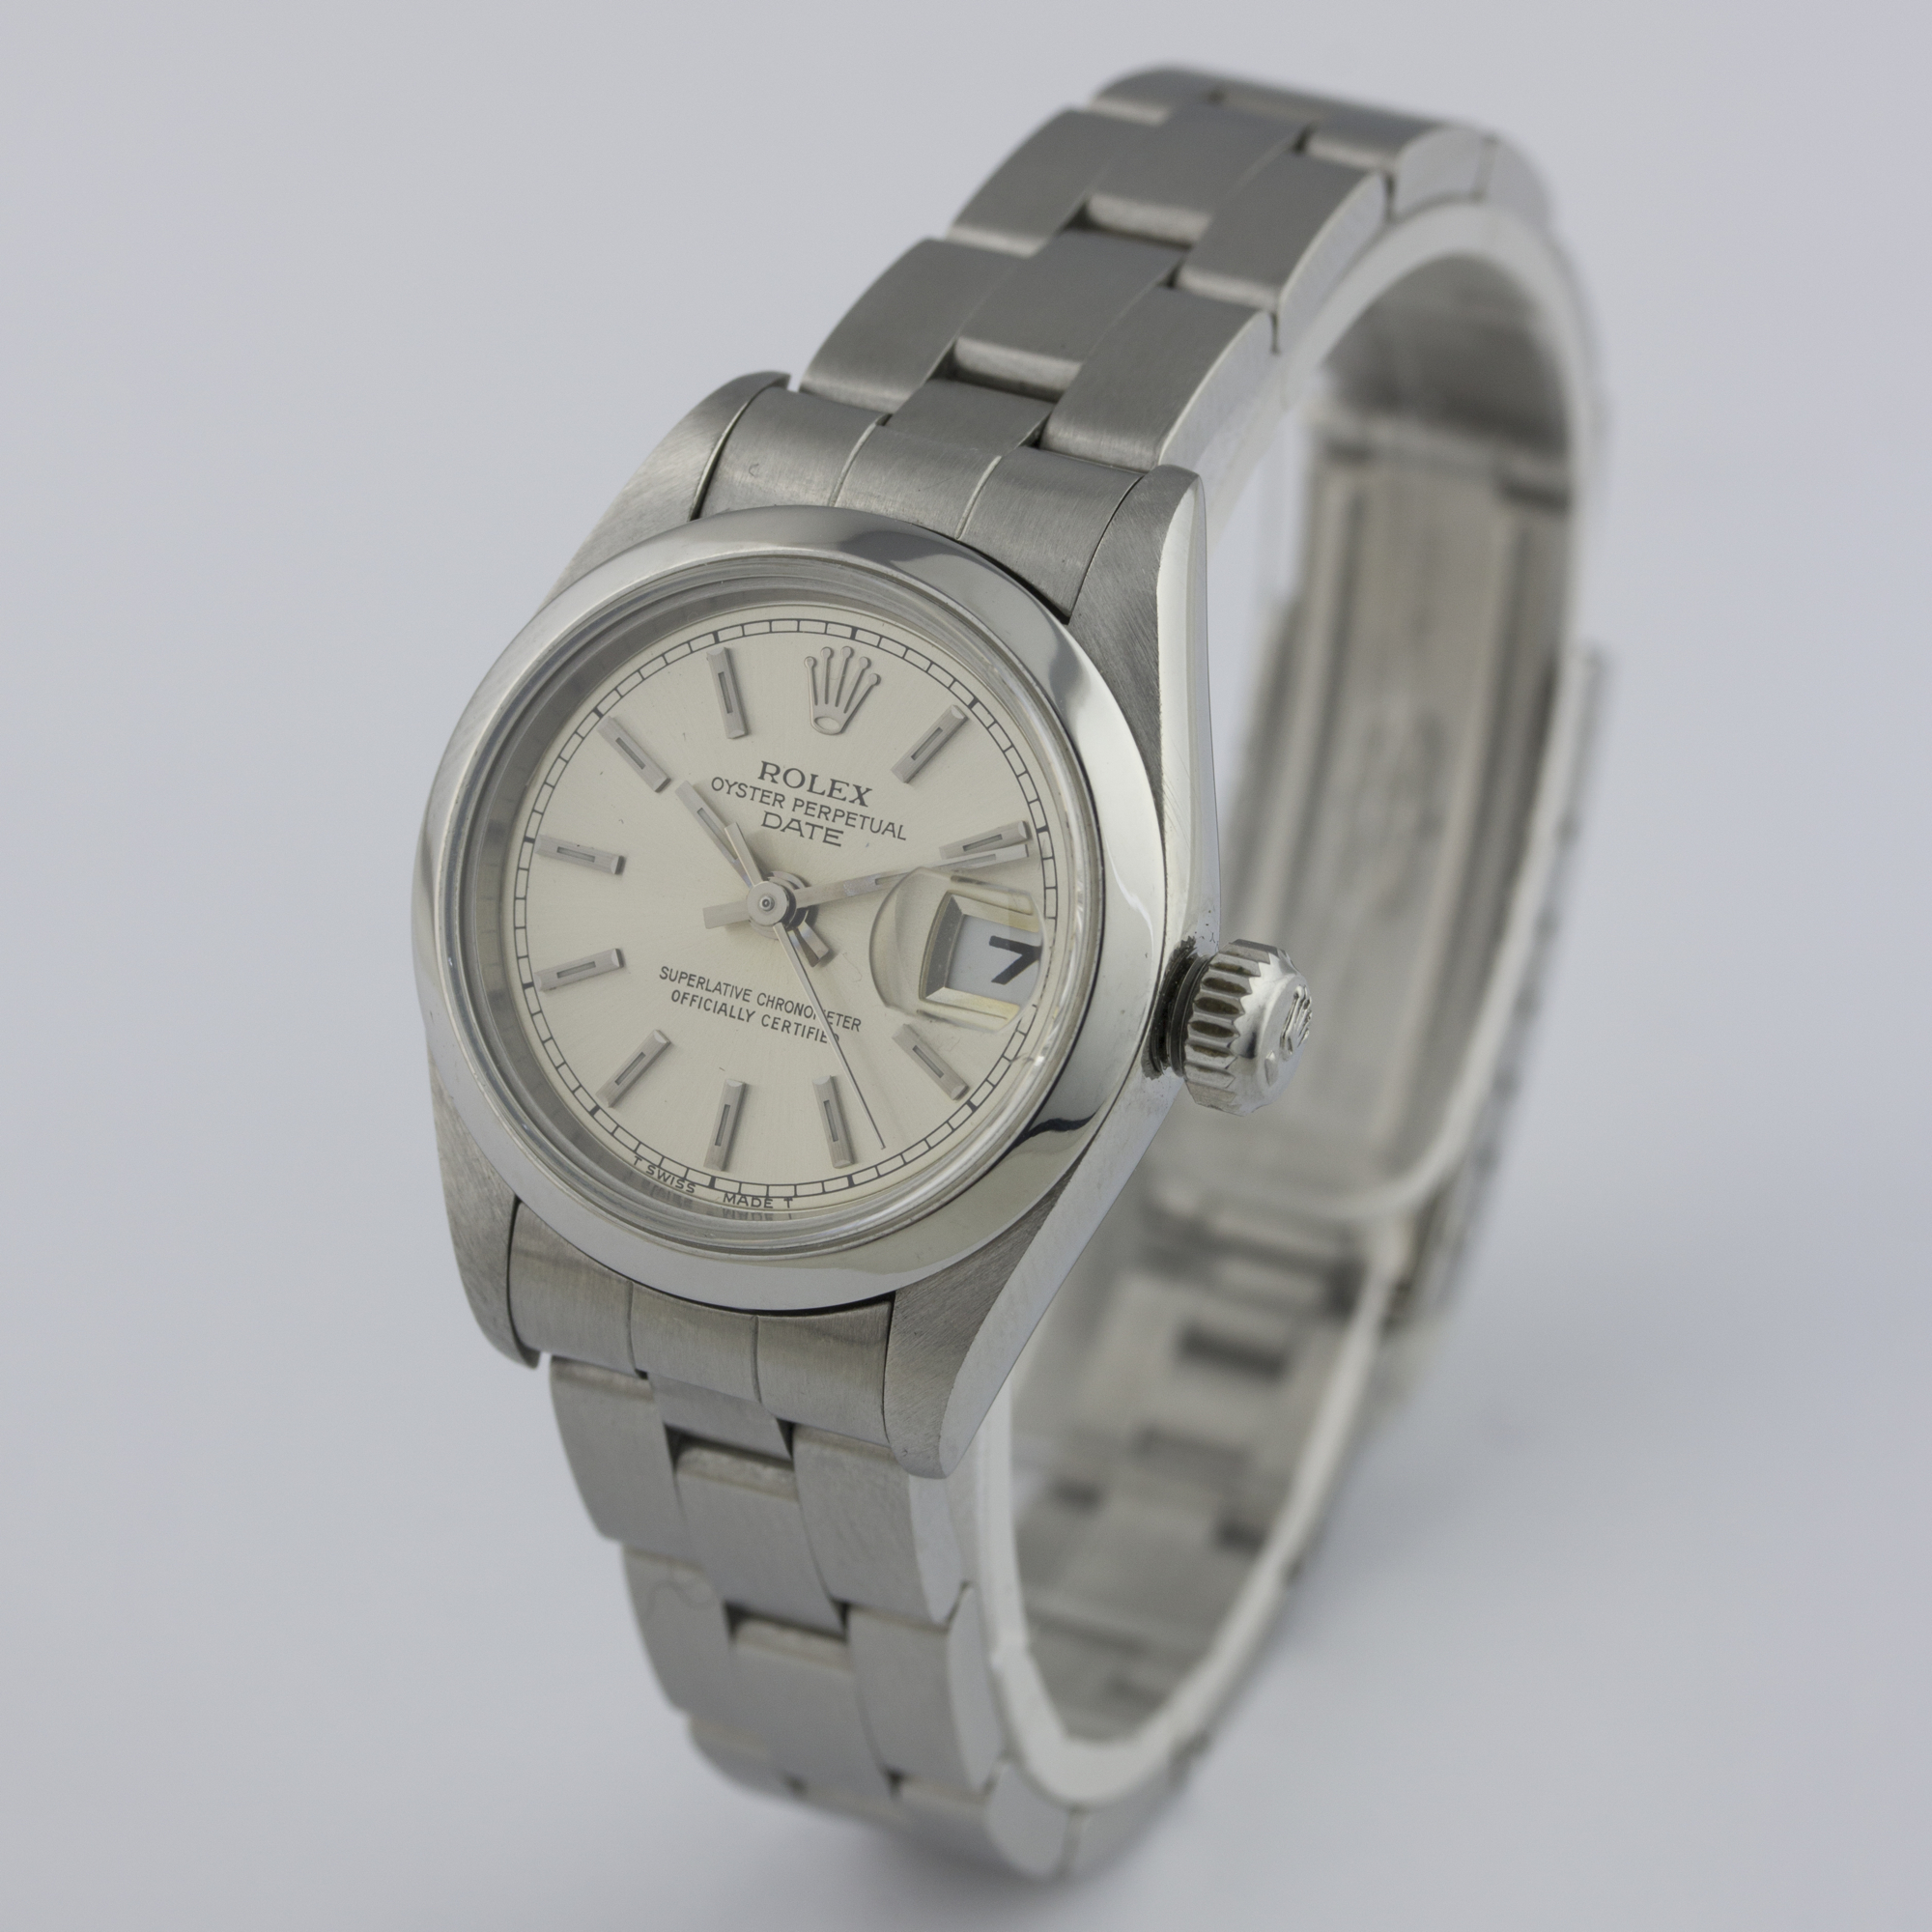 A LADIES STAINLESS STEEL ROLEX OYSTER PERPETUAL DATE BRACELET WATCH CIRCA 1993, REF. 69160 D: Silver - Image 4 of 9